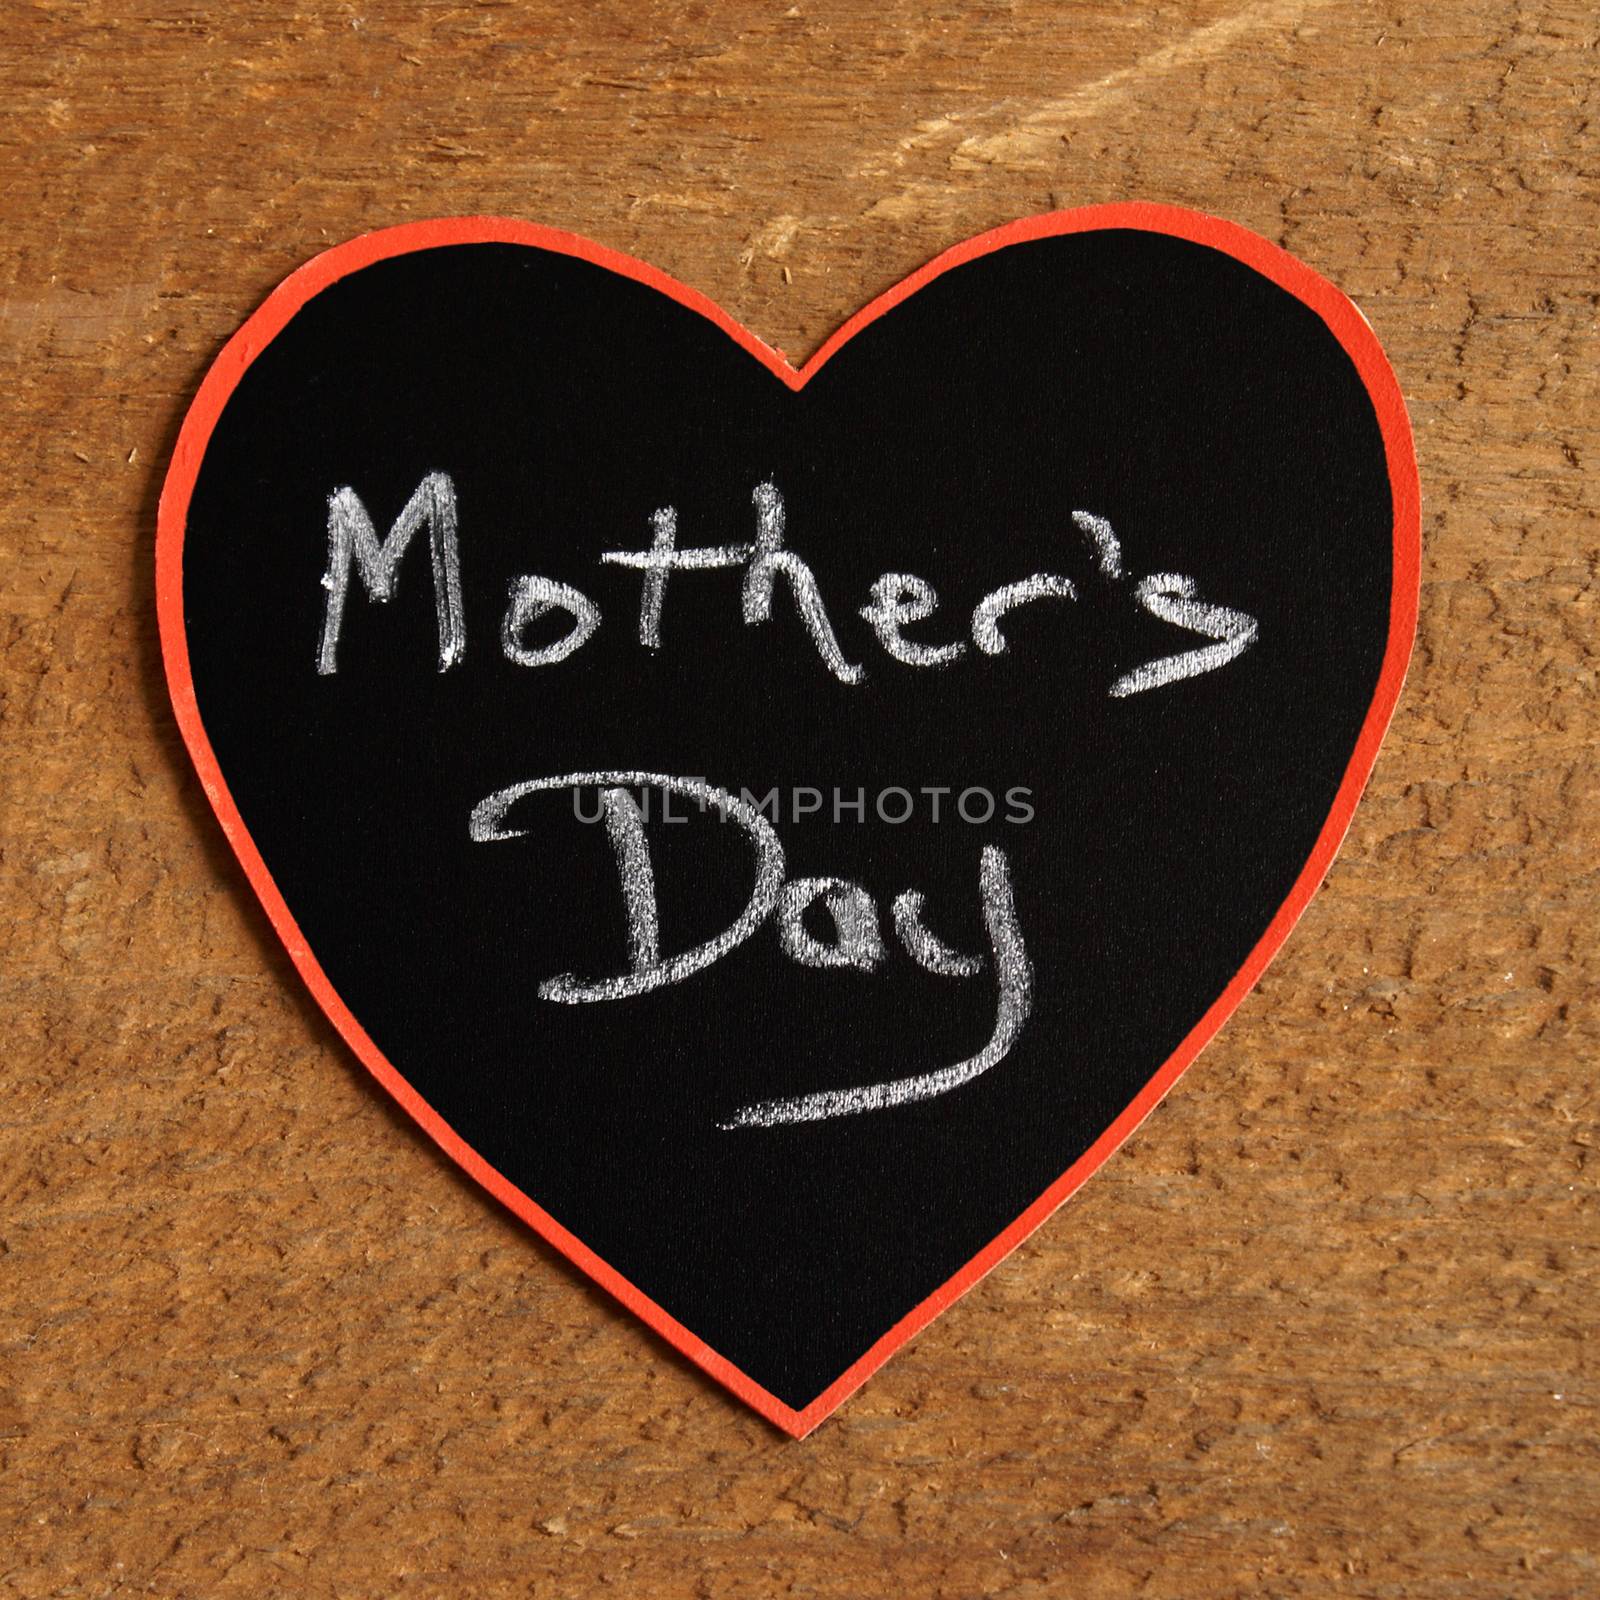 A heart with a mothers day announcement using a chalkboard.